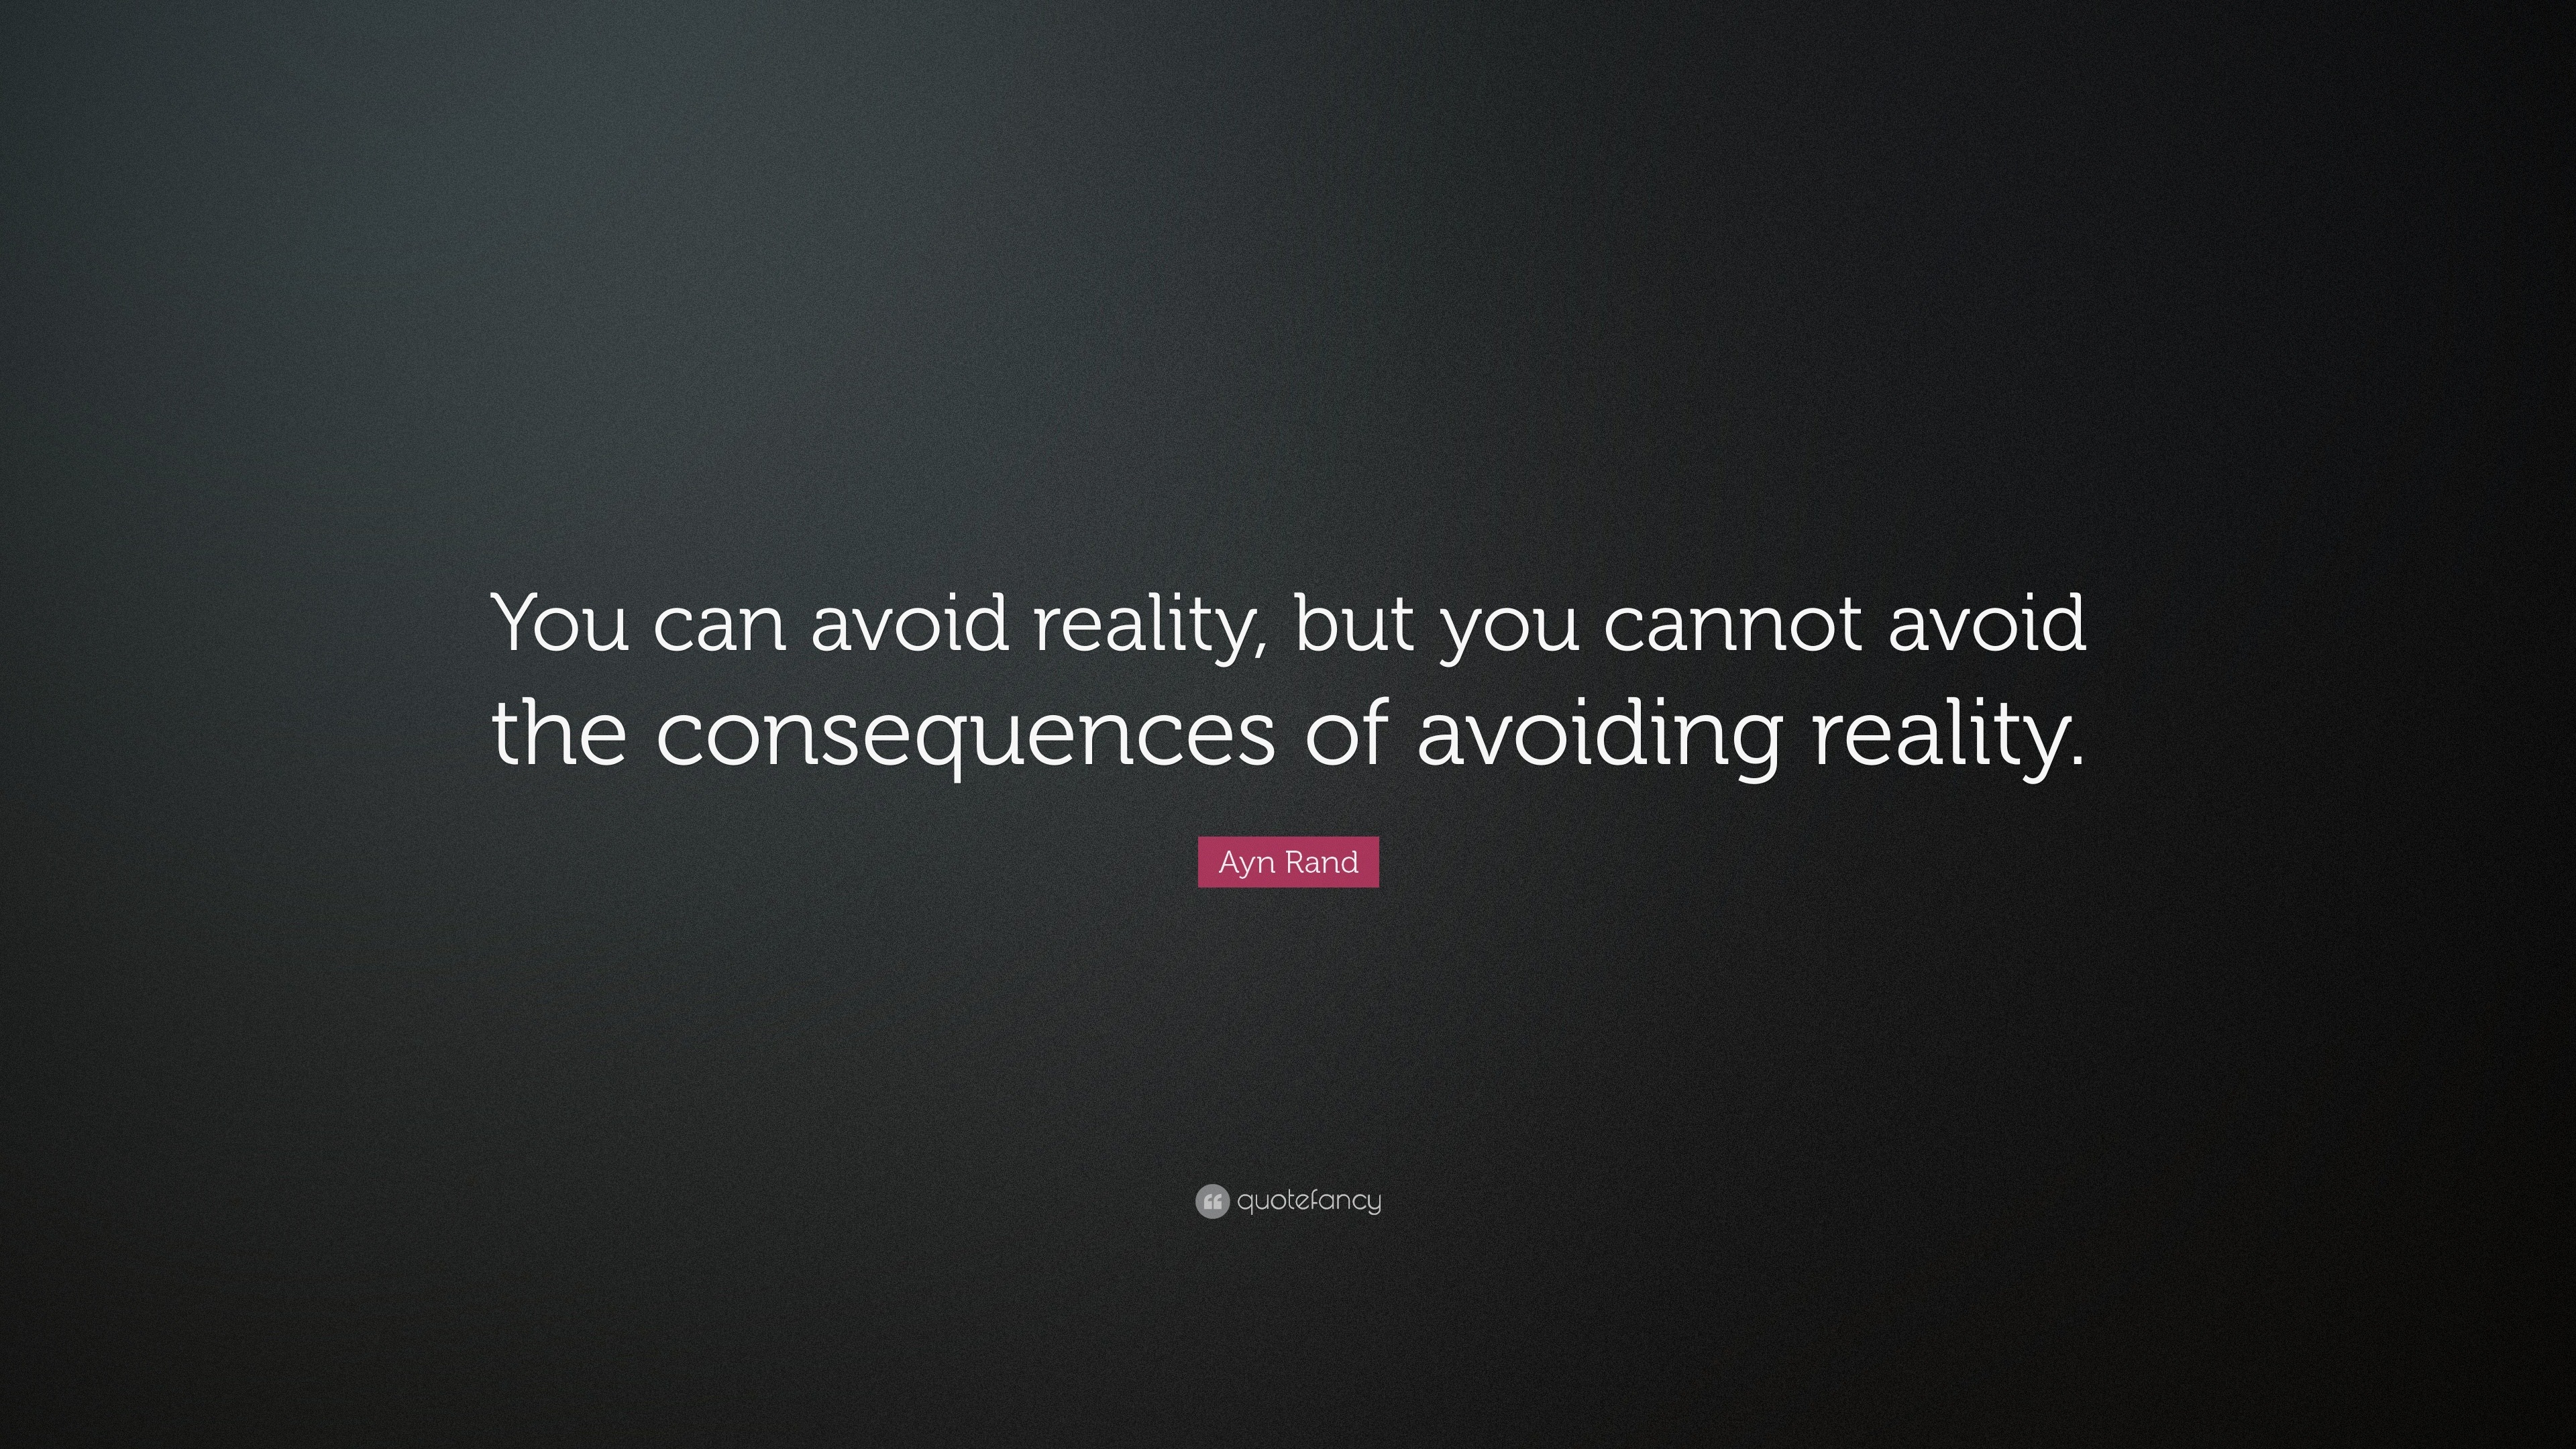 The Quotable Ayn Rand: 'You Can Avoid Reality, But 